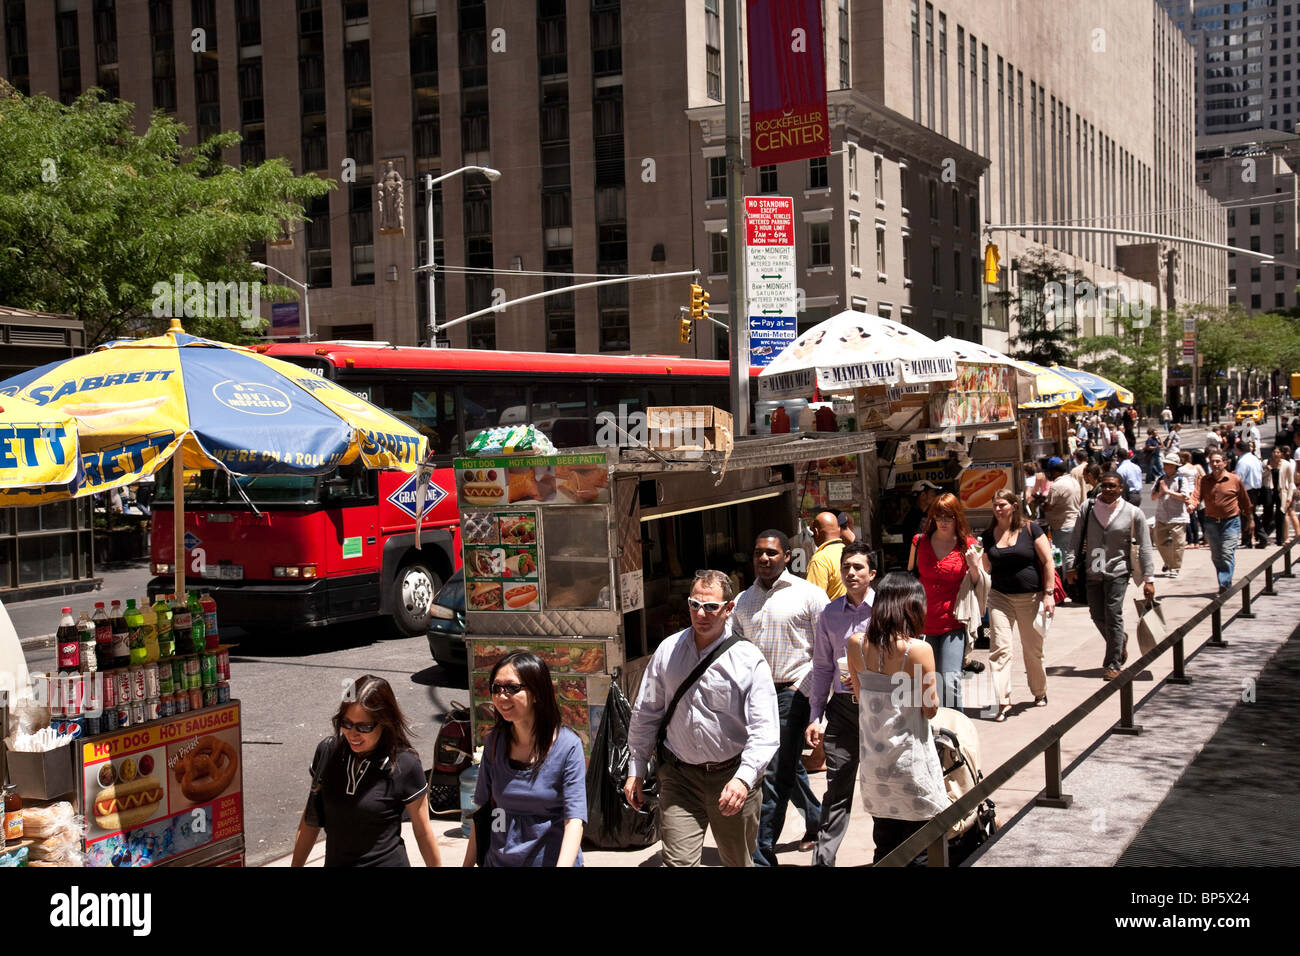 Crowded Sidewalk and Street Food Vendors, Rockefeller Center, NYC Stock Photo